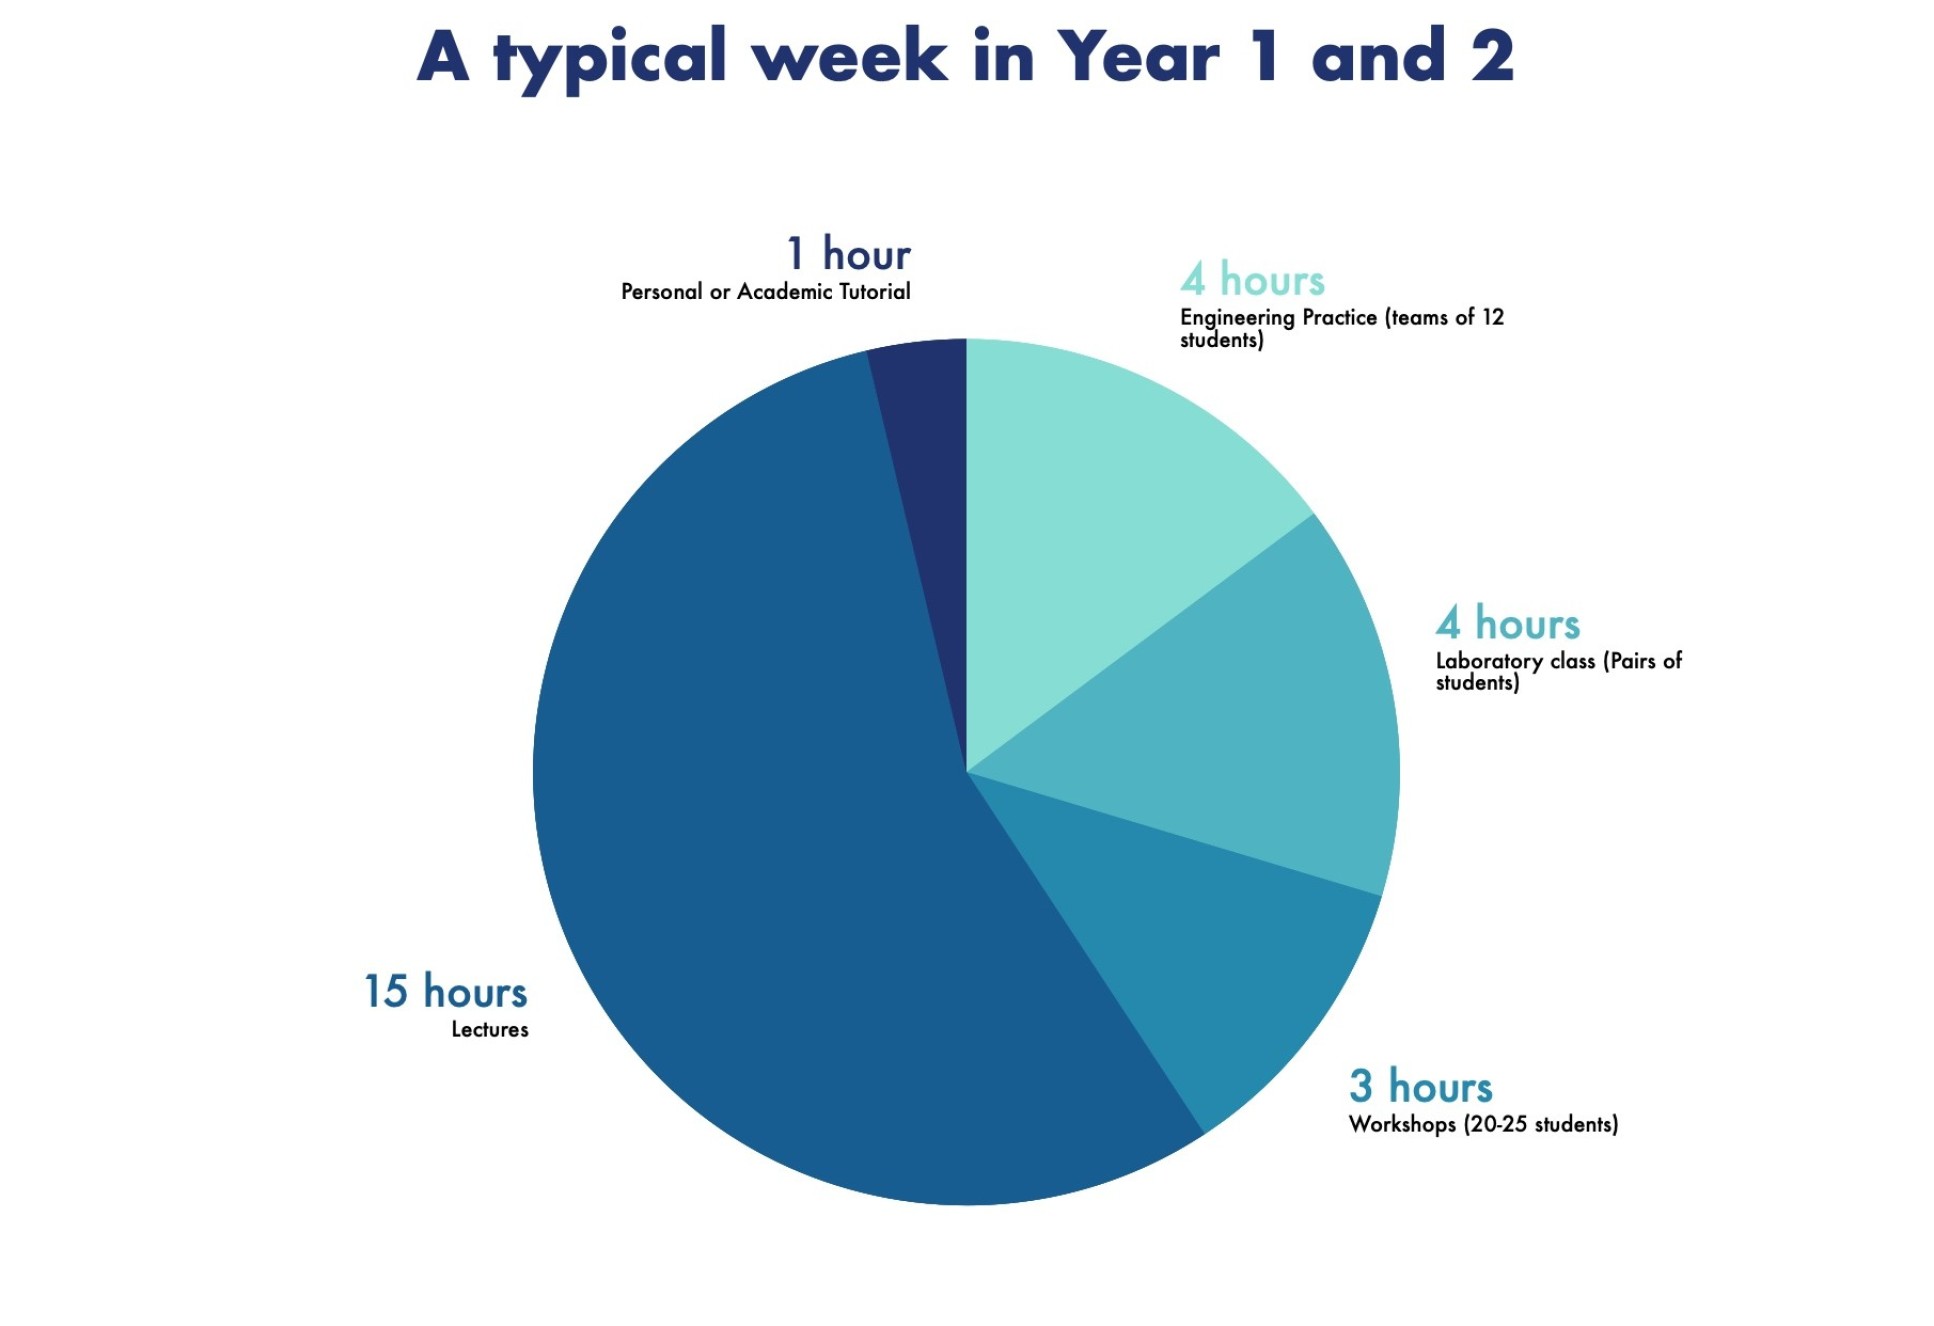 A typical week in Year 1 and 2